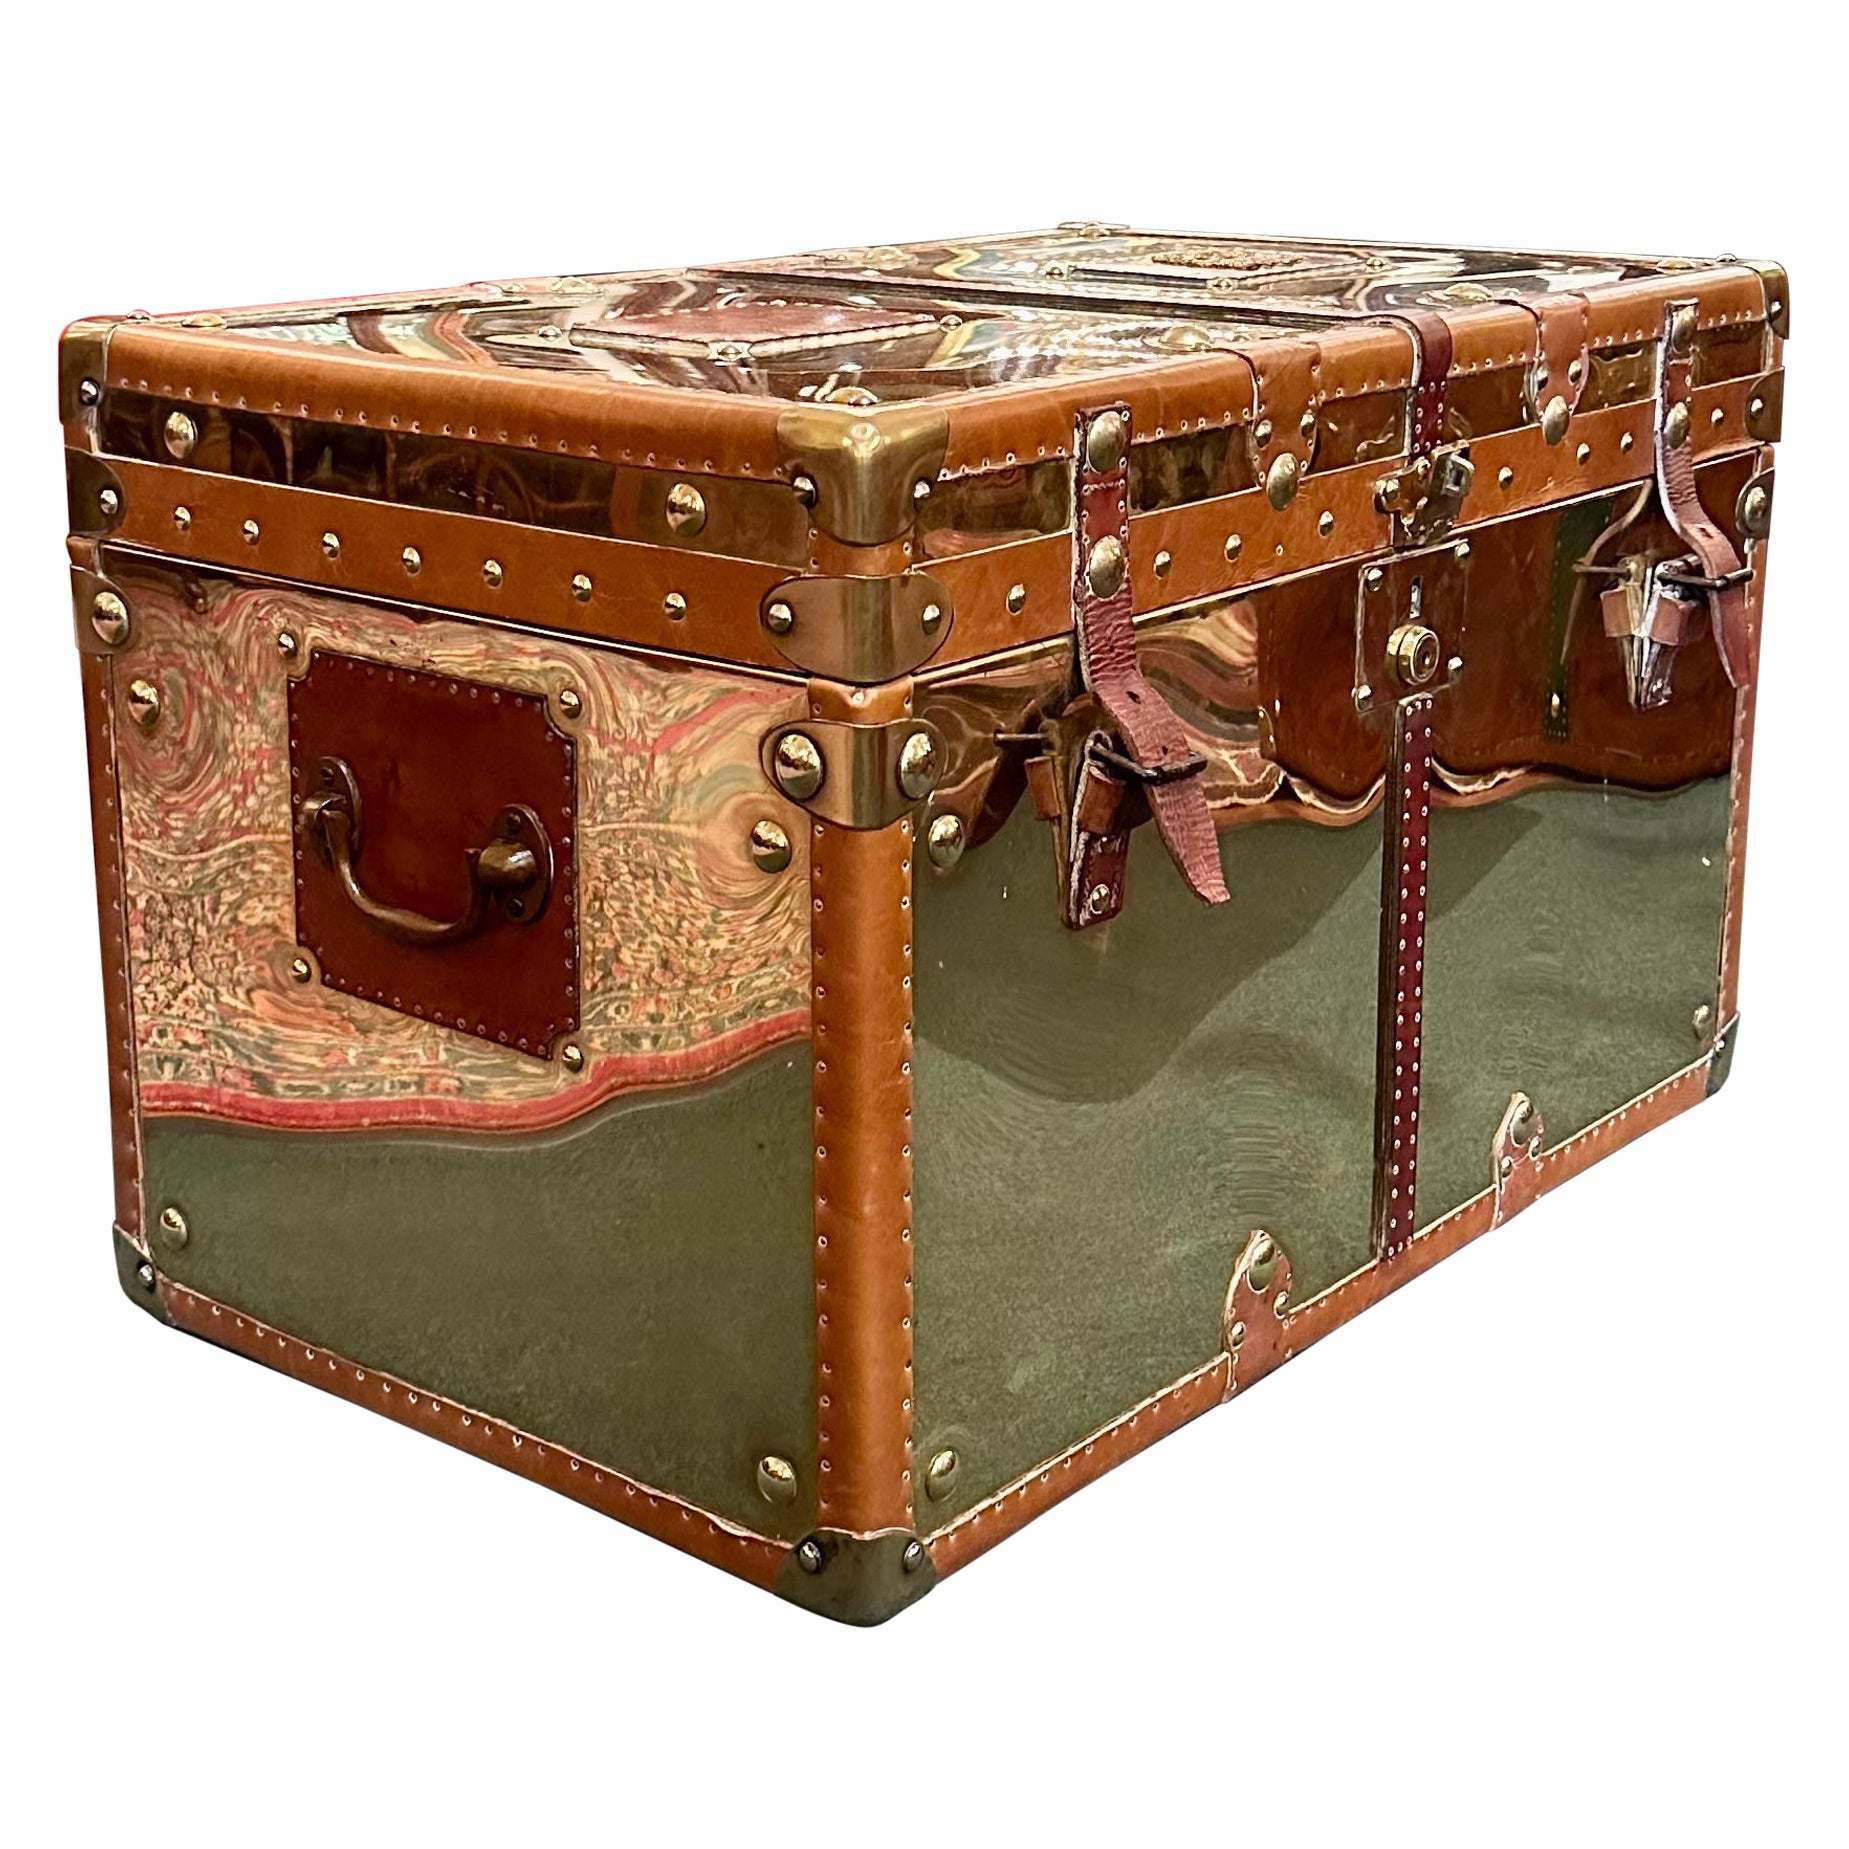 Luxury Antique Steamer Trunk Circa 1890 S Home Furnishings 